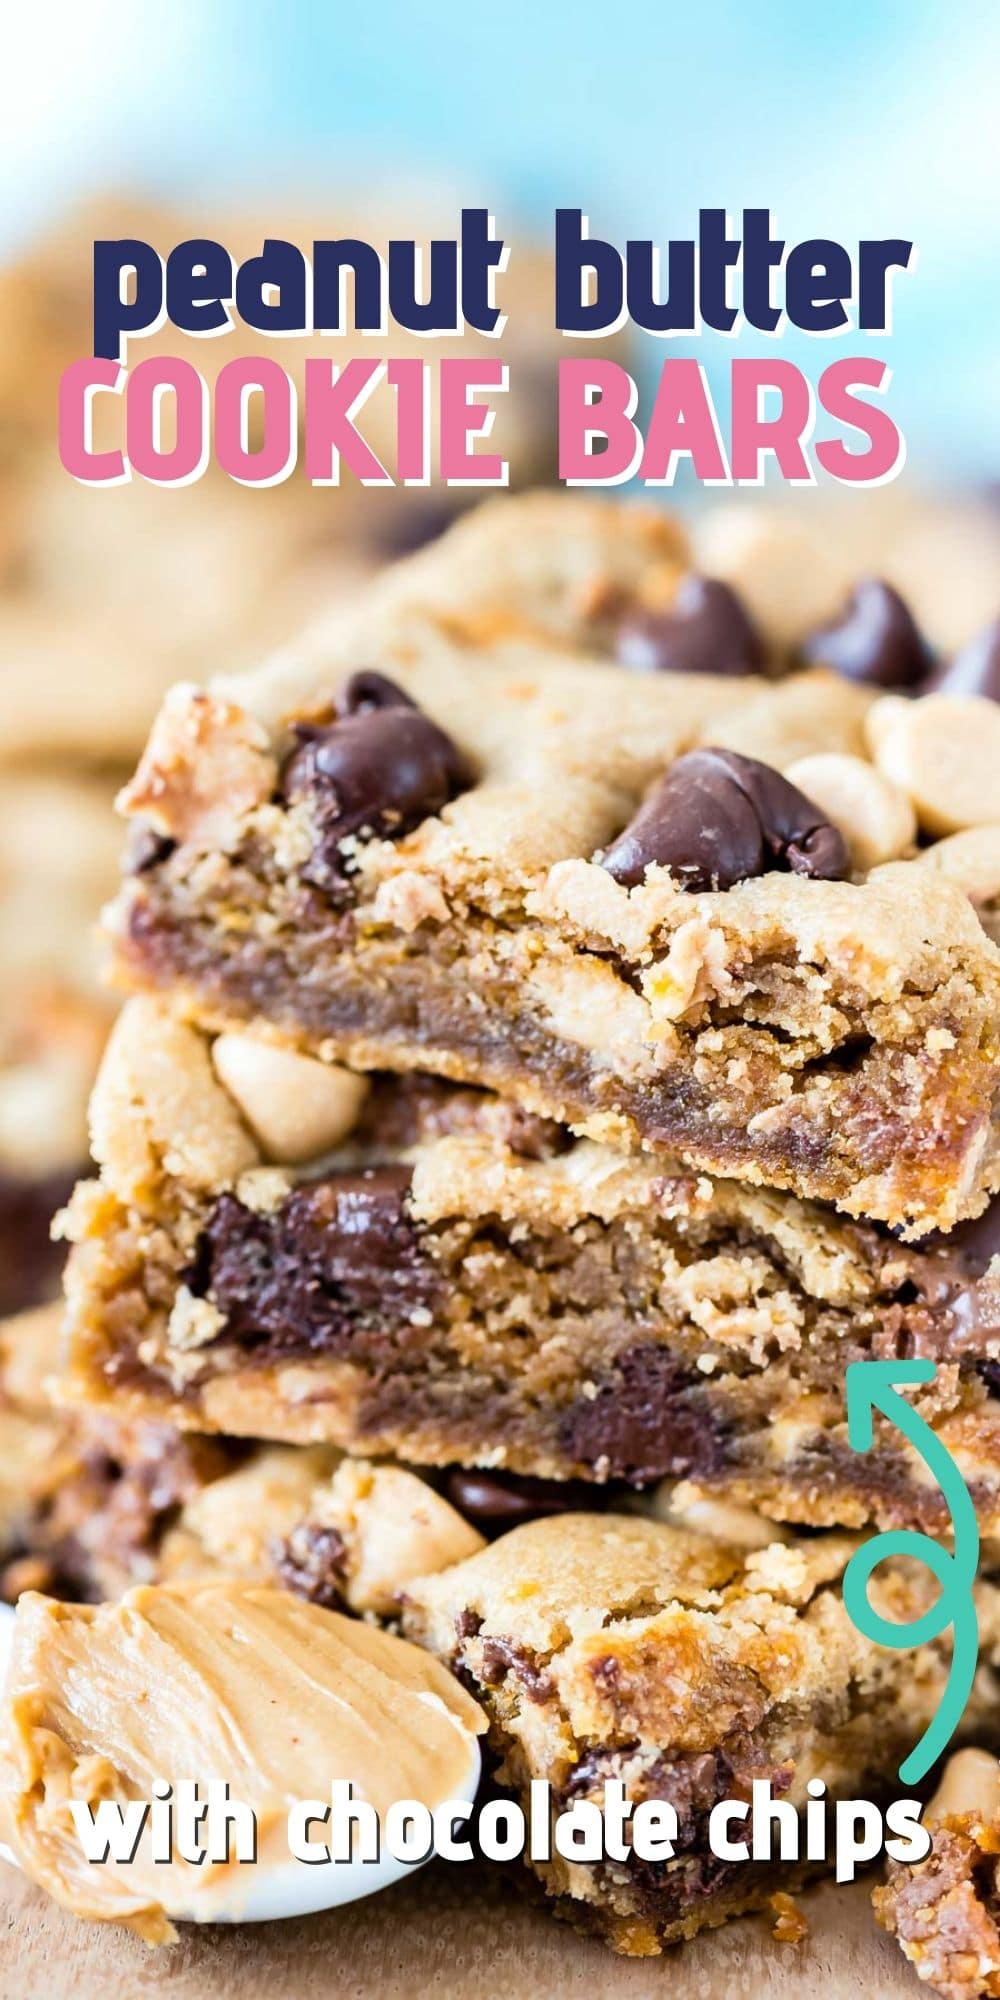 Stack of peanut butter cookie bars with recipe title on top of image